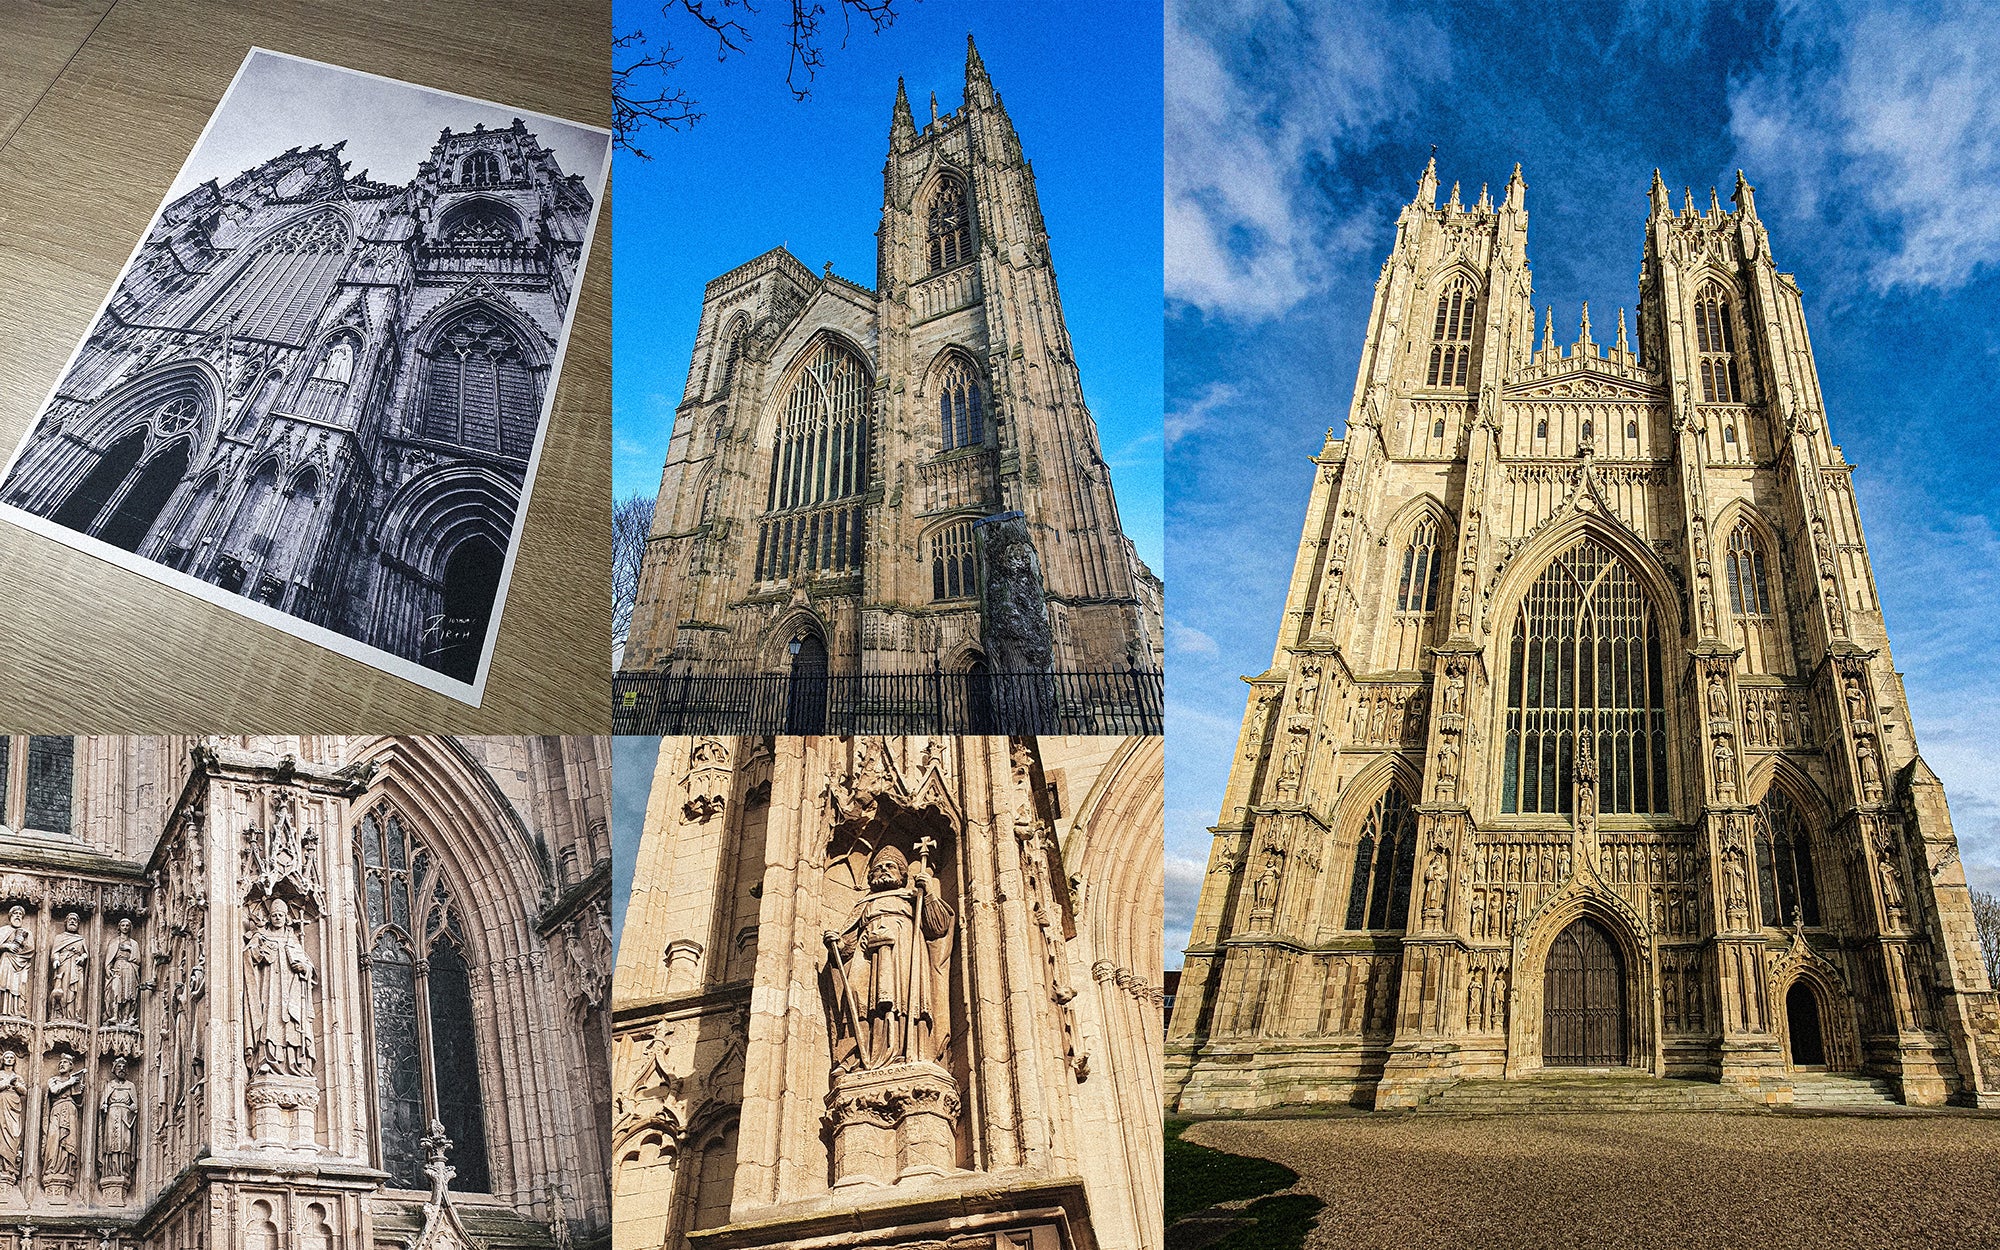 Photography of York Minster, Beverley Minster & Bridlington Priory of St Mary's, Yorkshire.